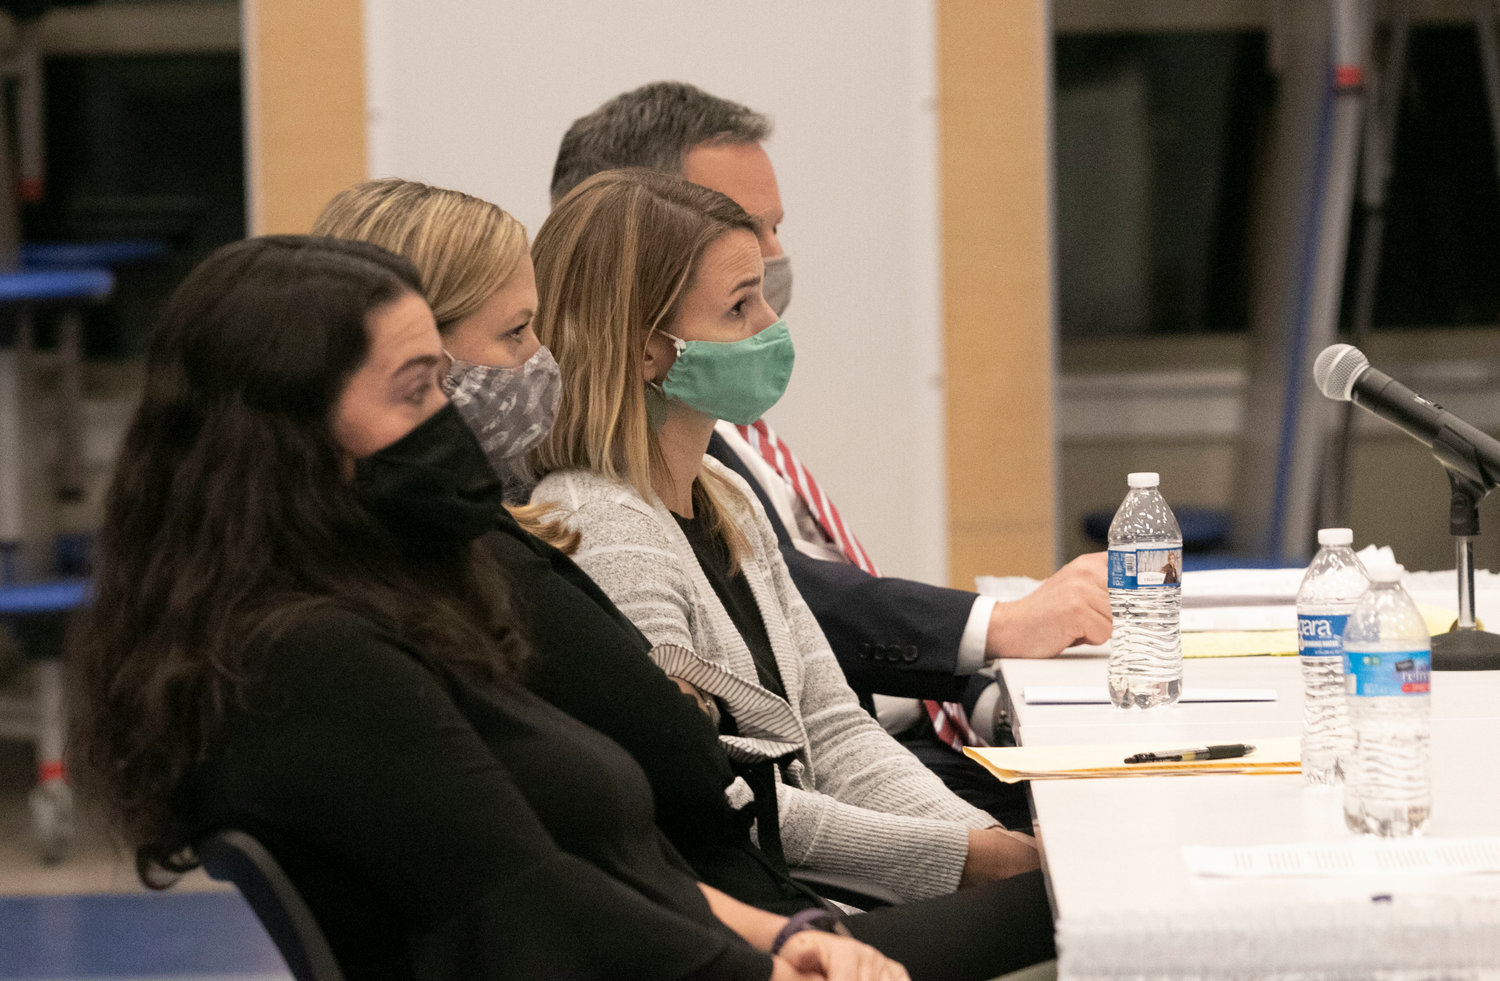 Barrington teachers Kerri Thurber, Brittany DiOrio, and Stephanie Hines (from left to right) sit with their attorney, Greg Piccirilli during a pre-termination hearing in Oct. 2021.